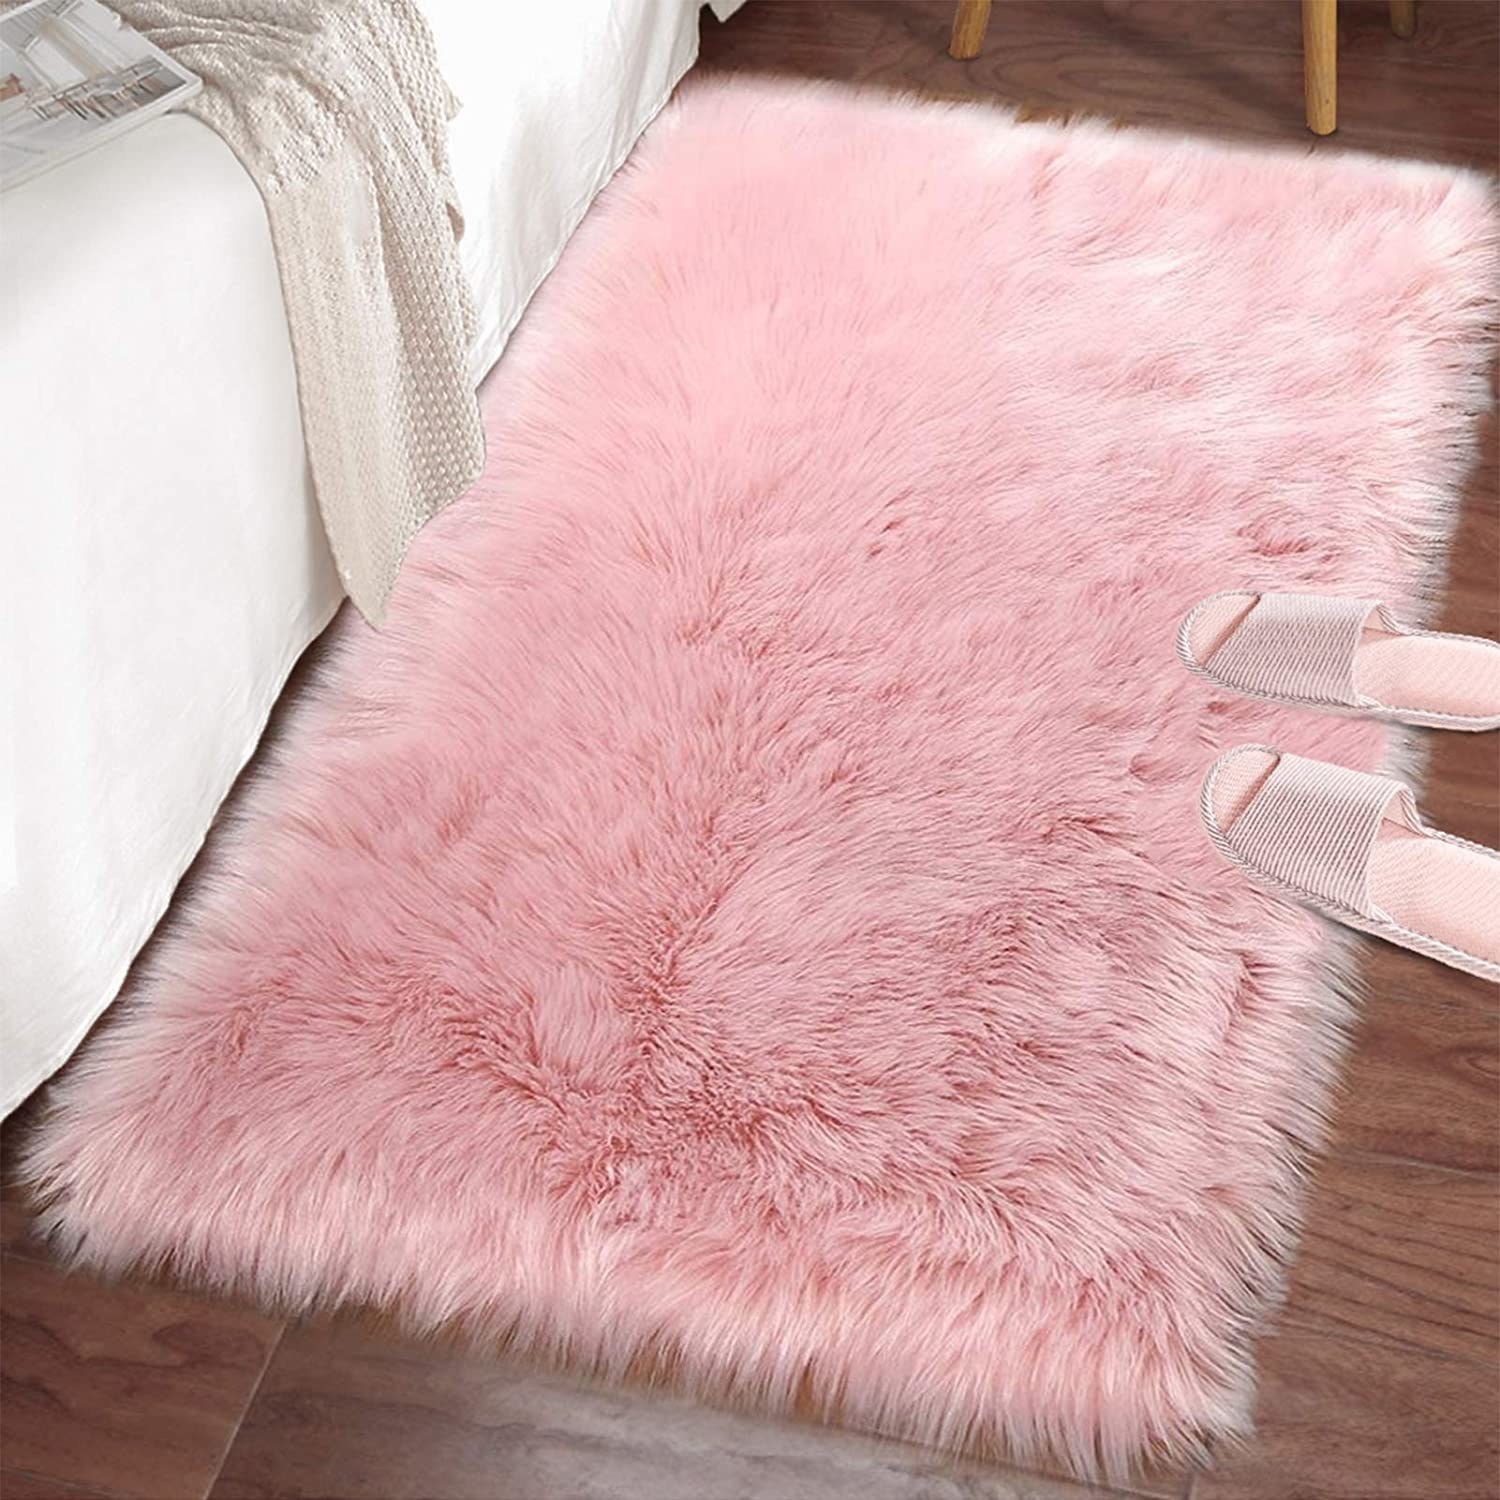 the fuzzy floor mat in pink on a wooden floor with slippers nearby